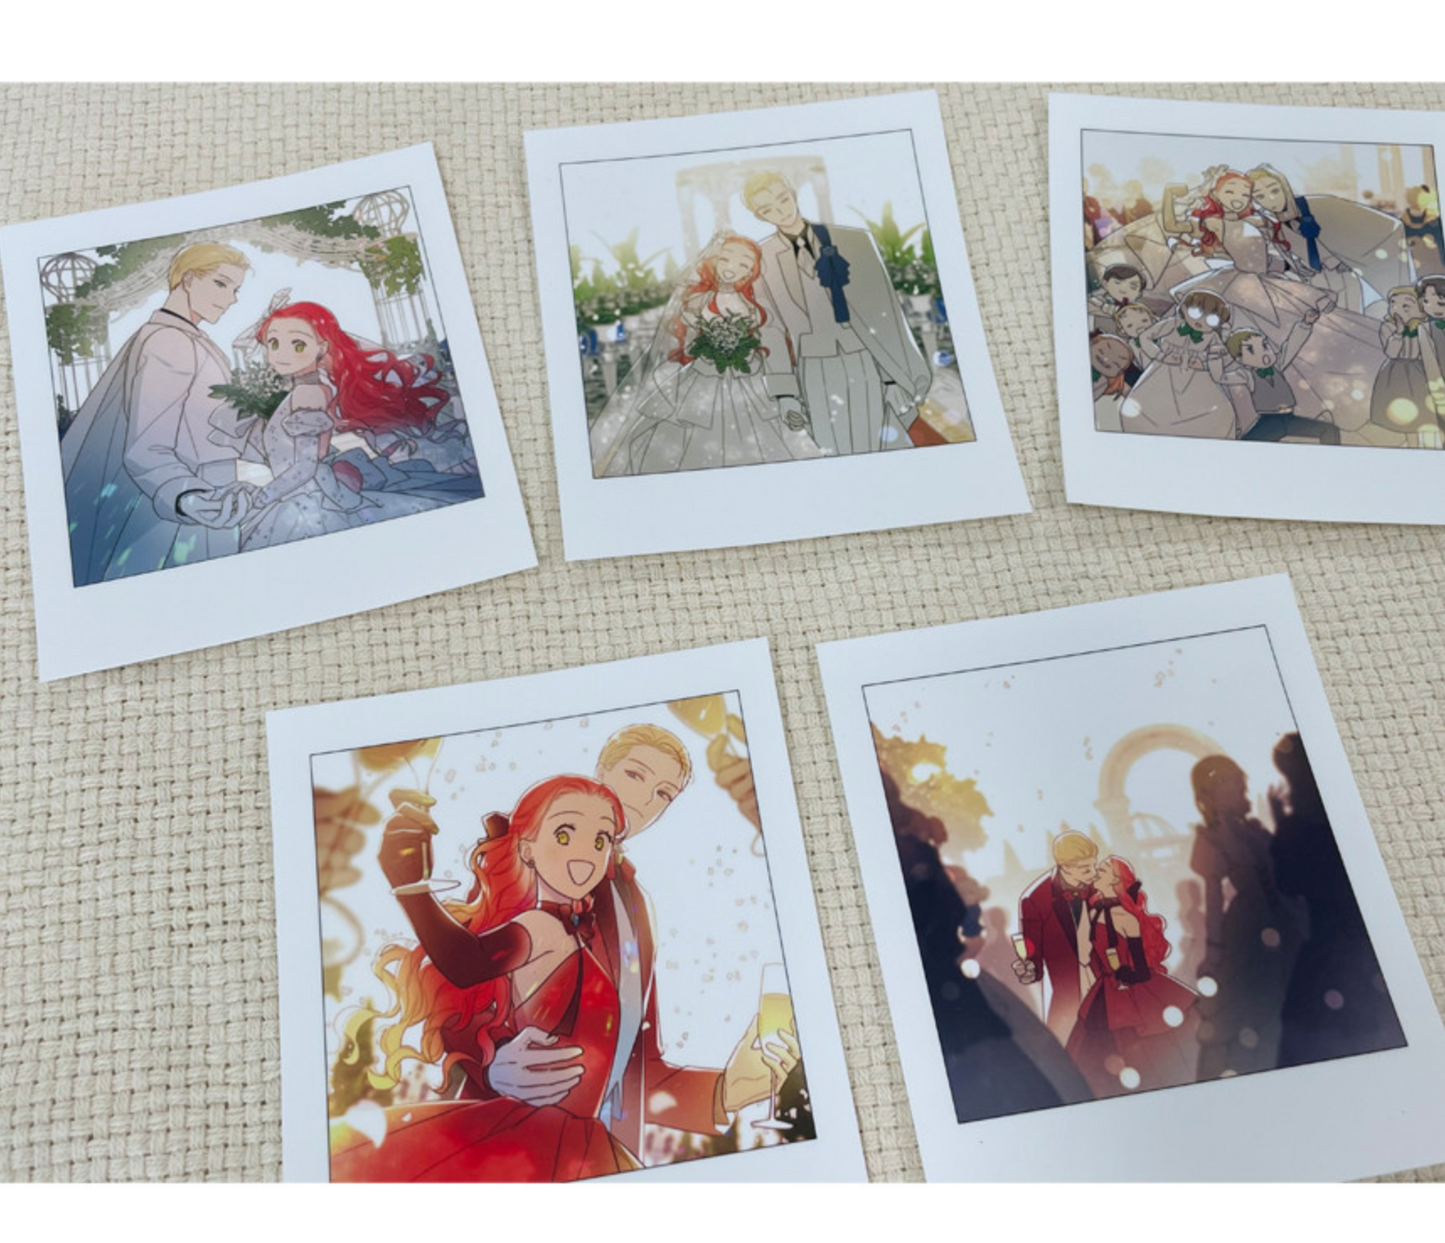 The First Night With the Duke : Polaroid Set